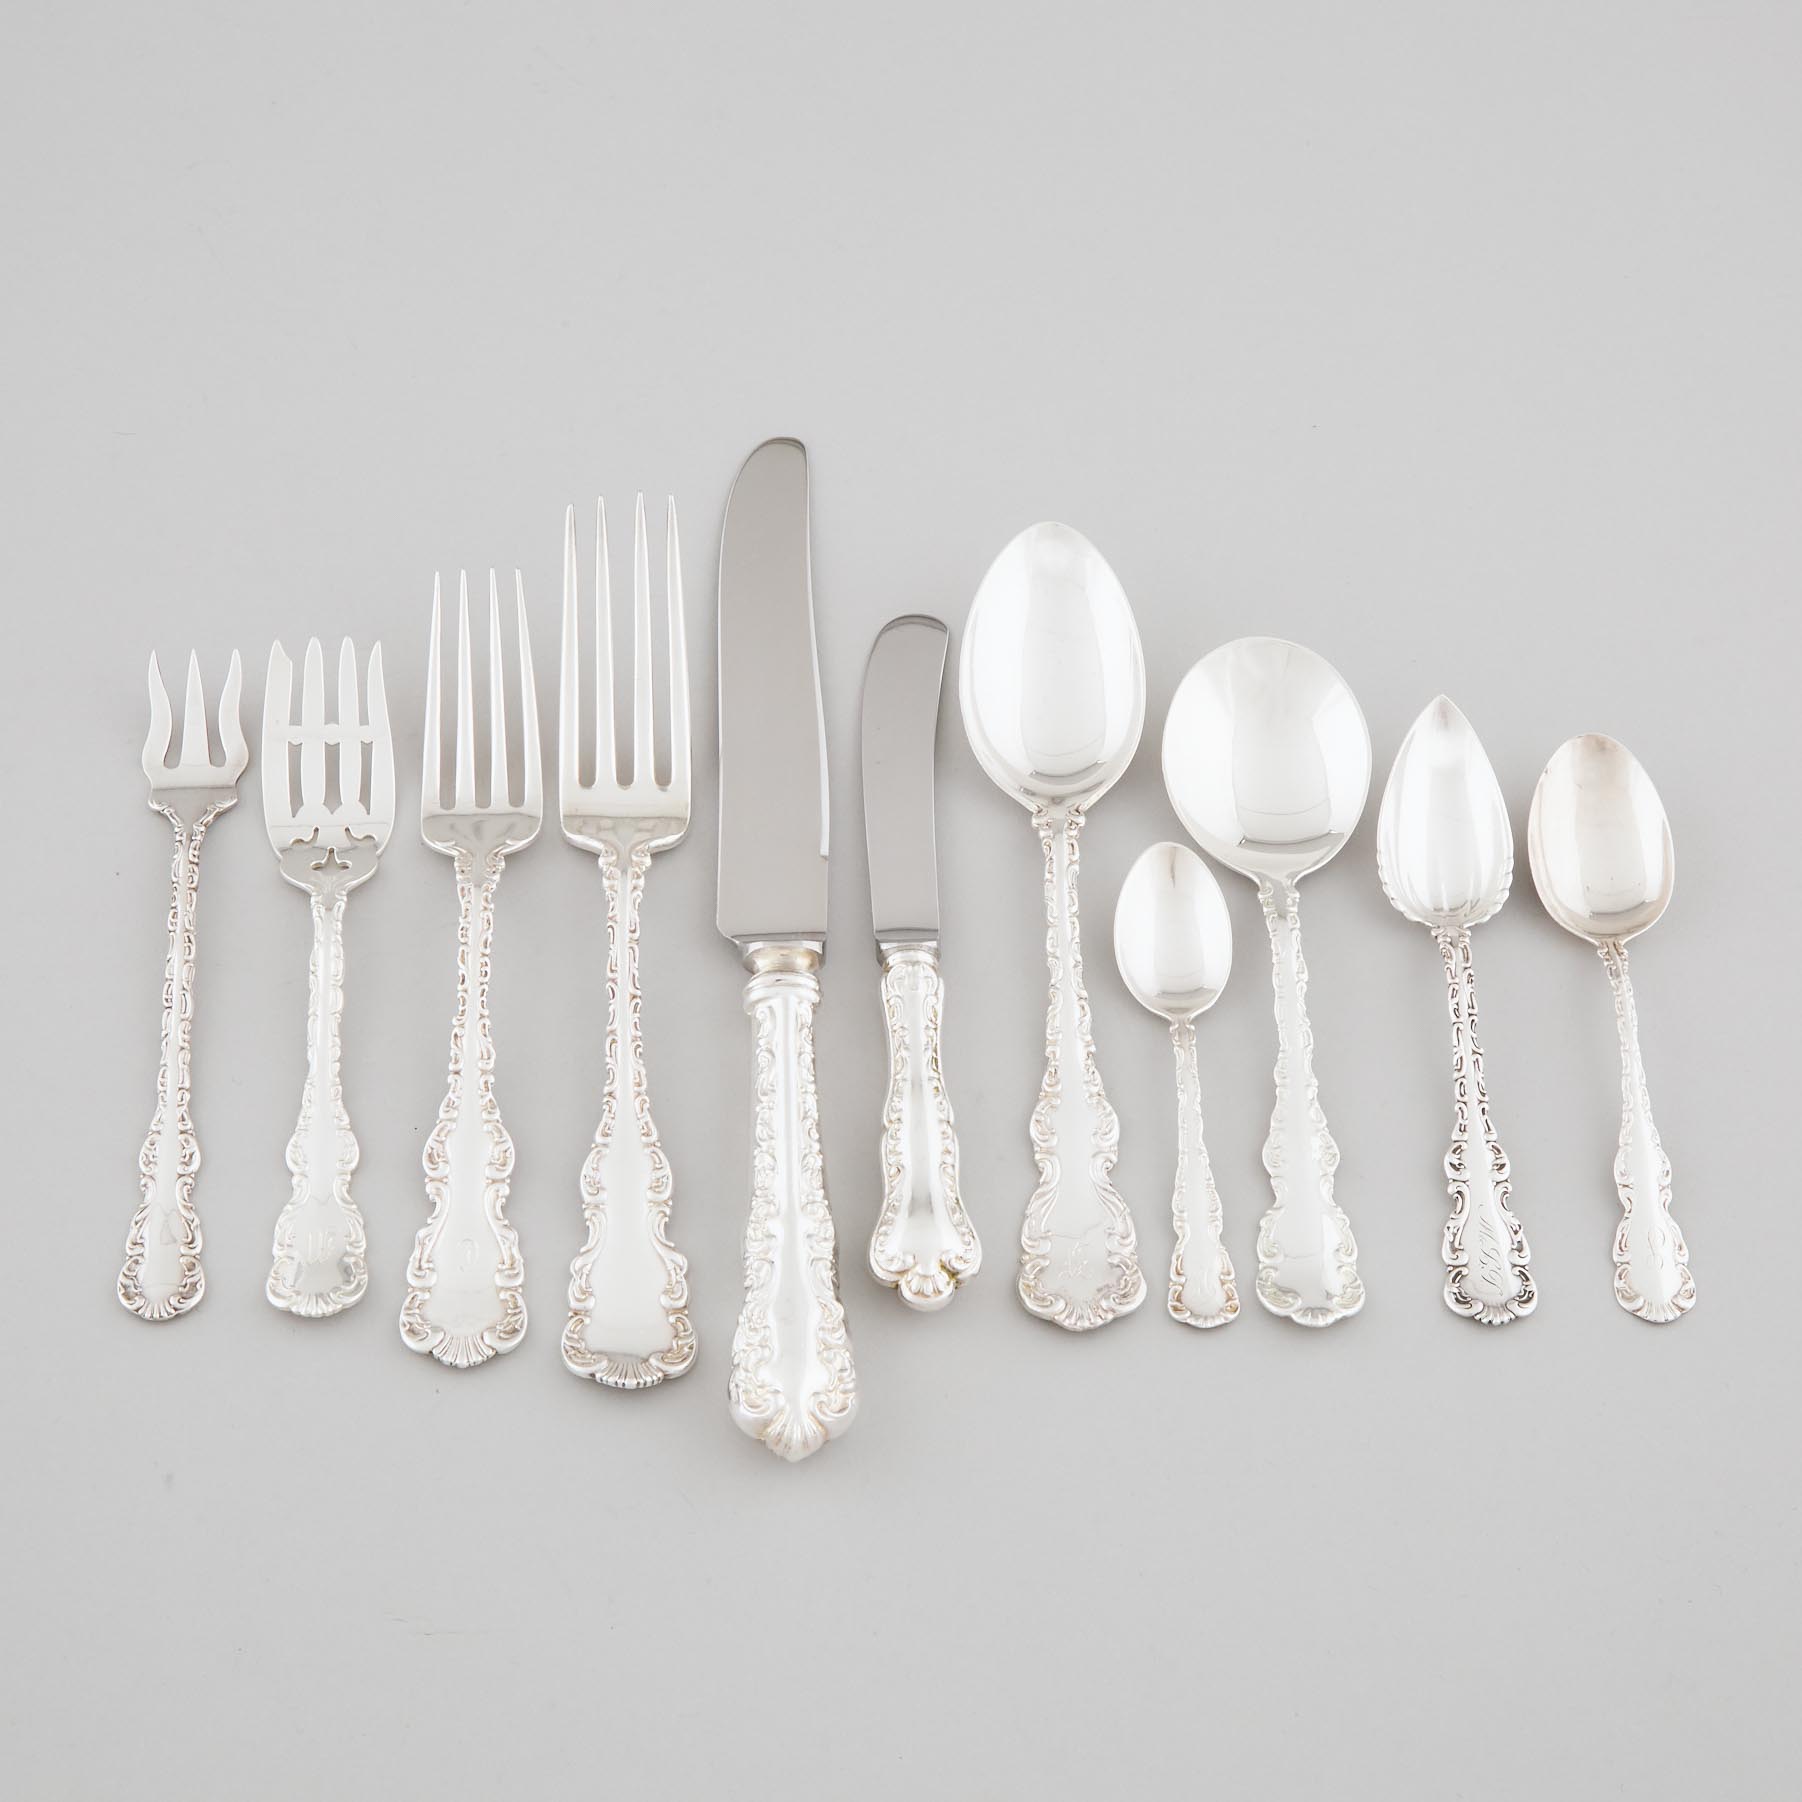 Assembled Mainly Canadian Silver 'Louis XV' Pattern Flatware, 20th century